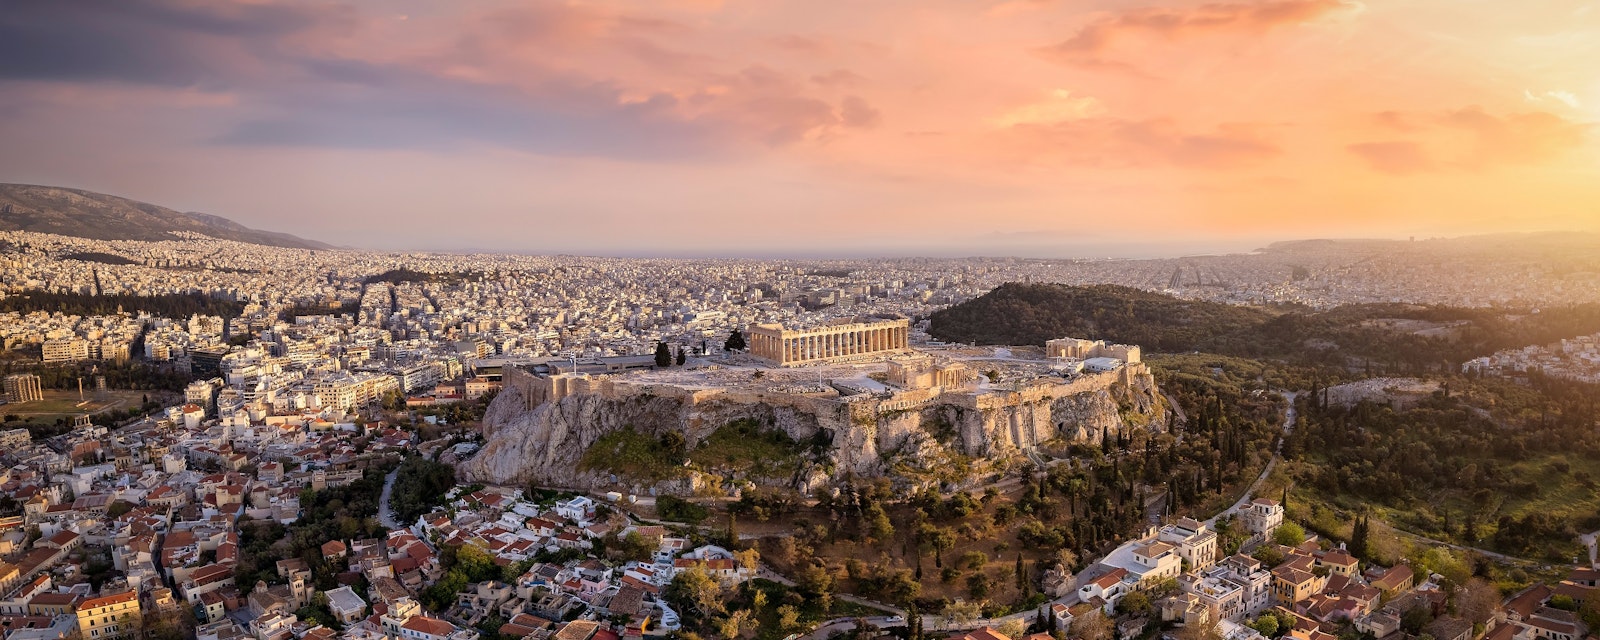 Beautiful,,Panoramic,View,Of,The,Acropolis,Of,Athens,,Greece,,With